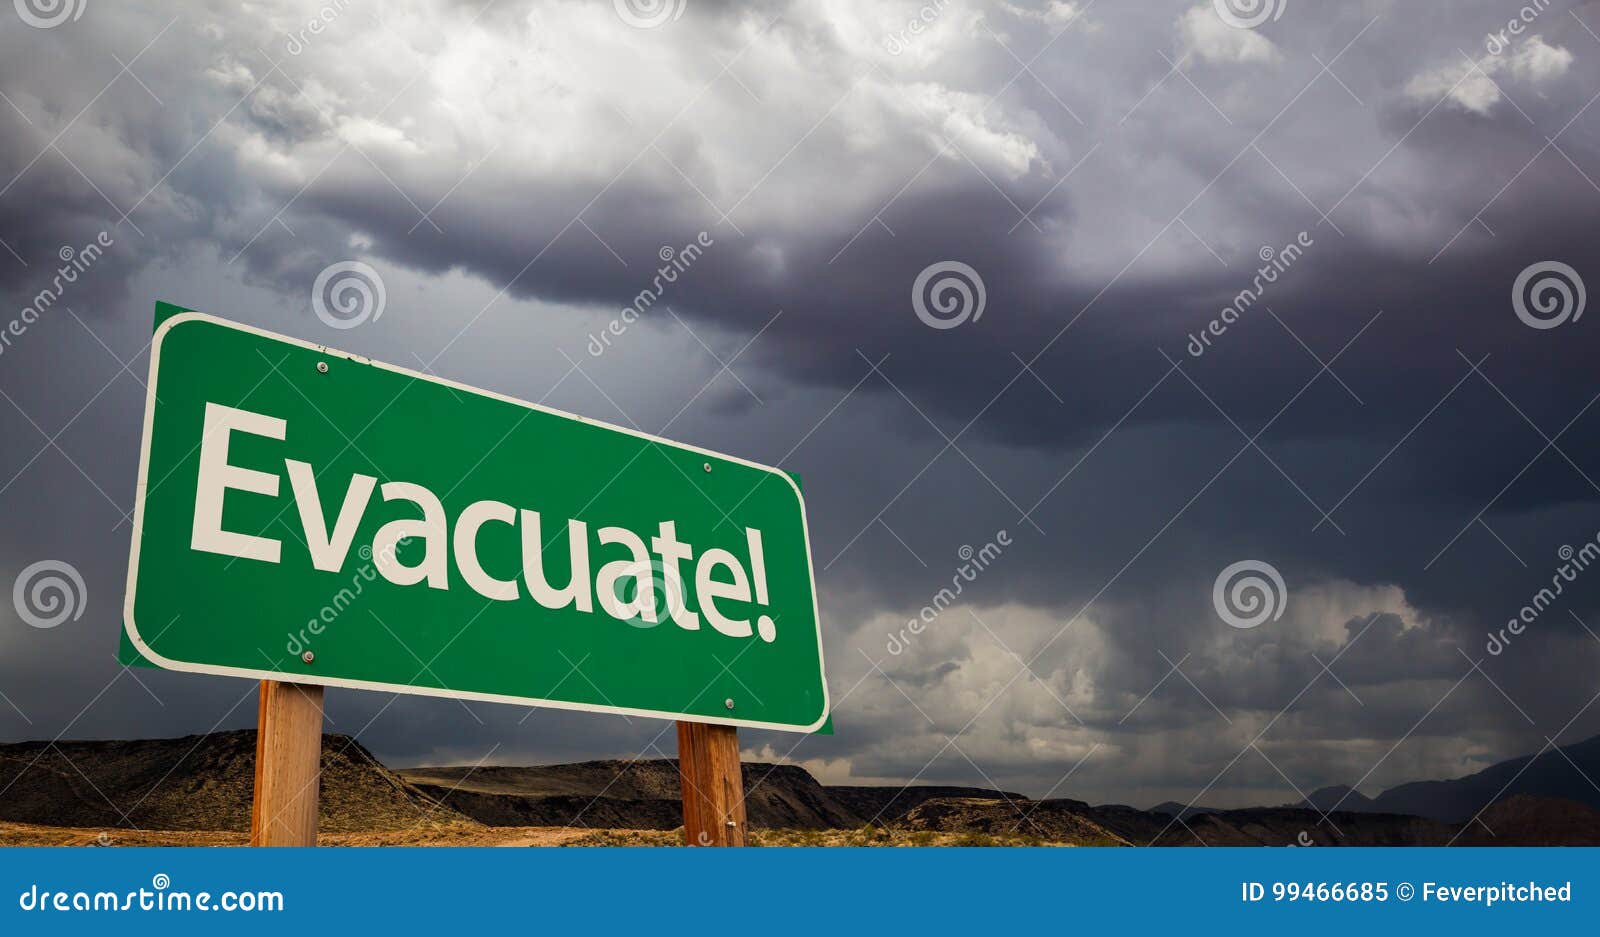 evacuate green road sign and stormy clouds